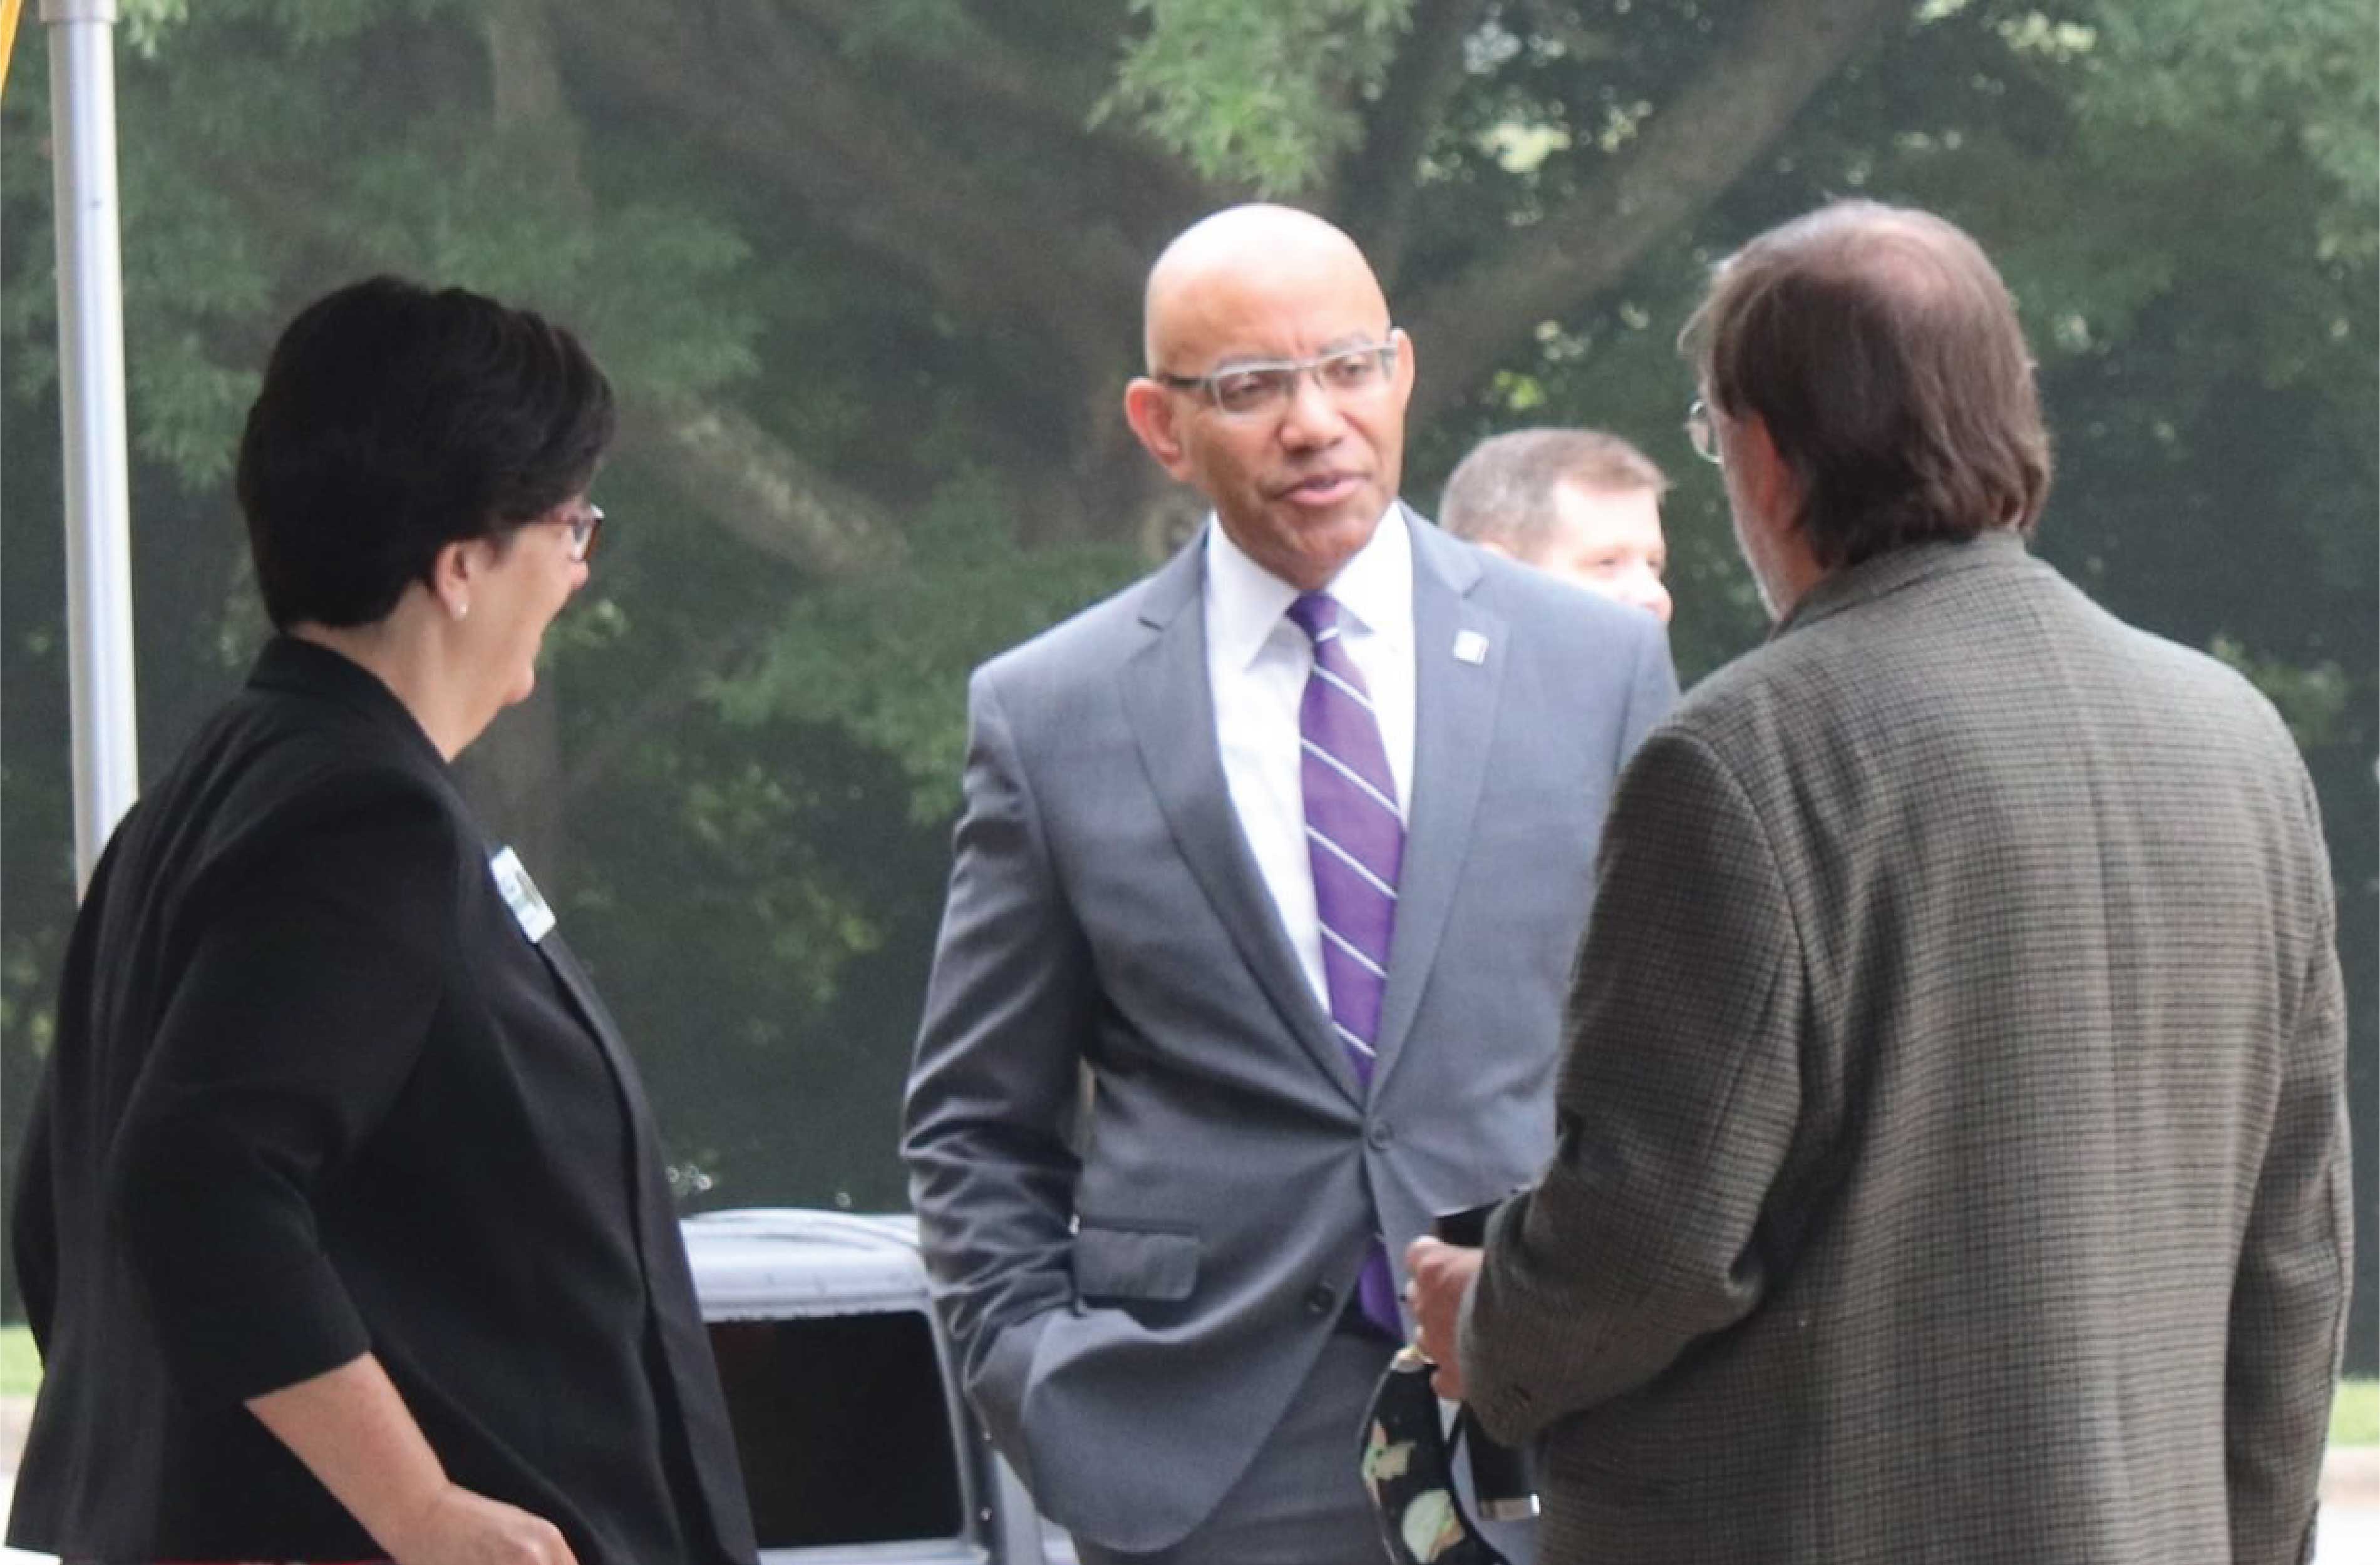 President Stith talking to people